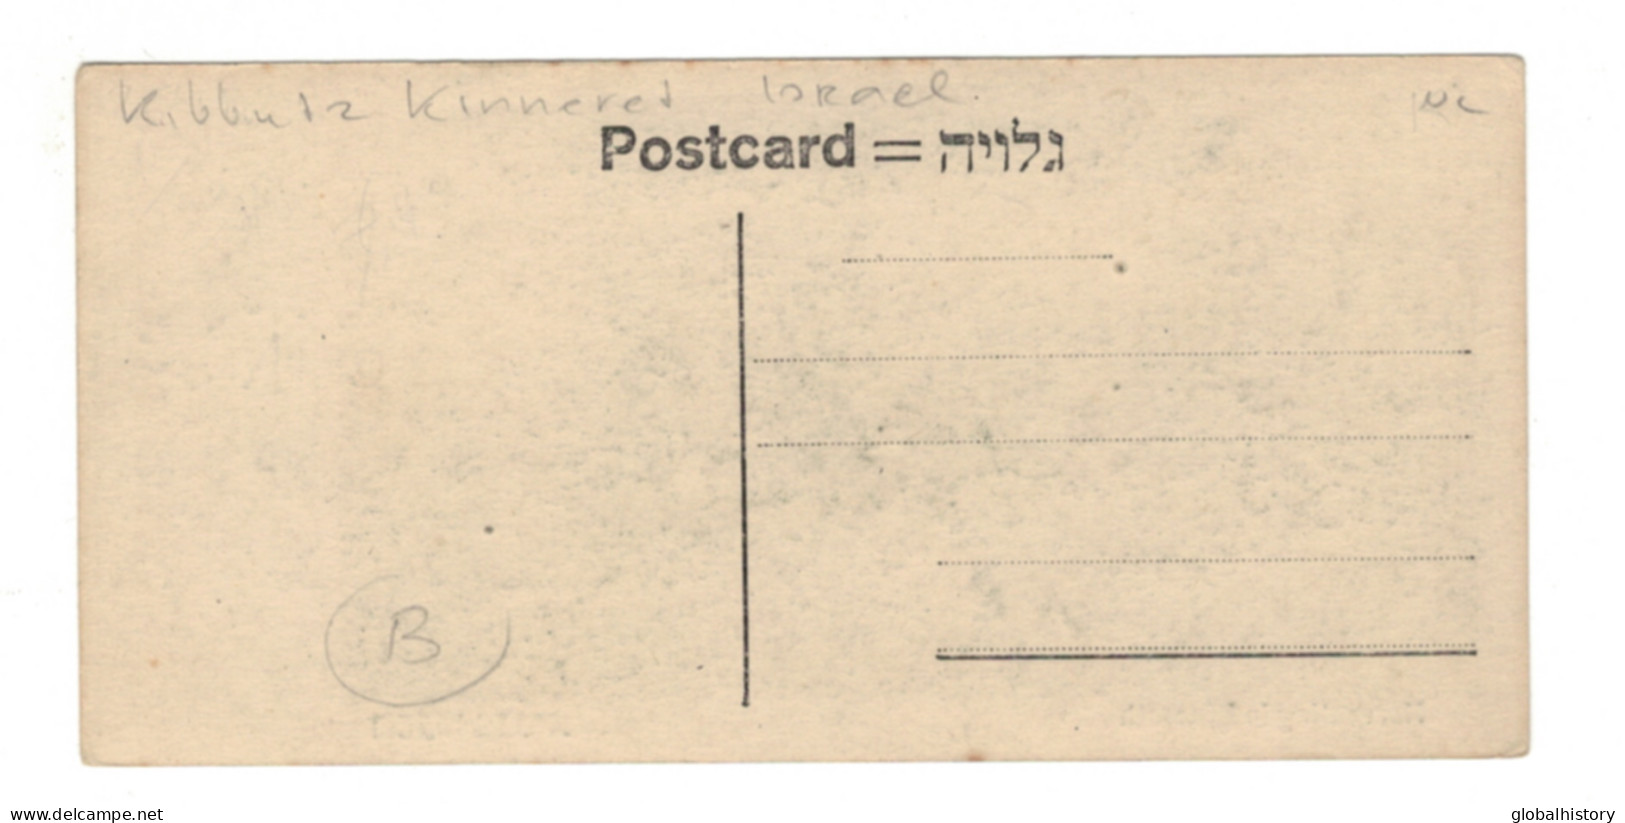 DH1418 - ISRAEL - HARVESTING IN KINNERET- SMALL PC 5.50x2.60 INCH - Israel